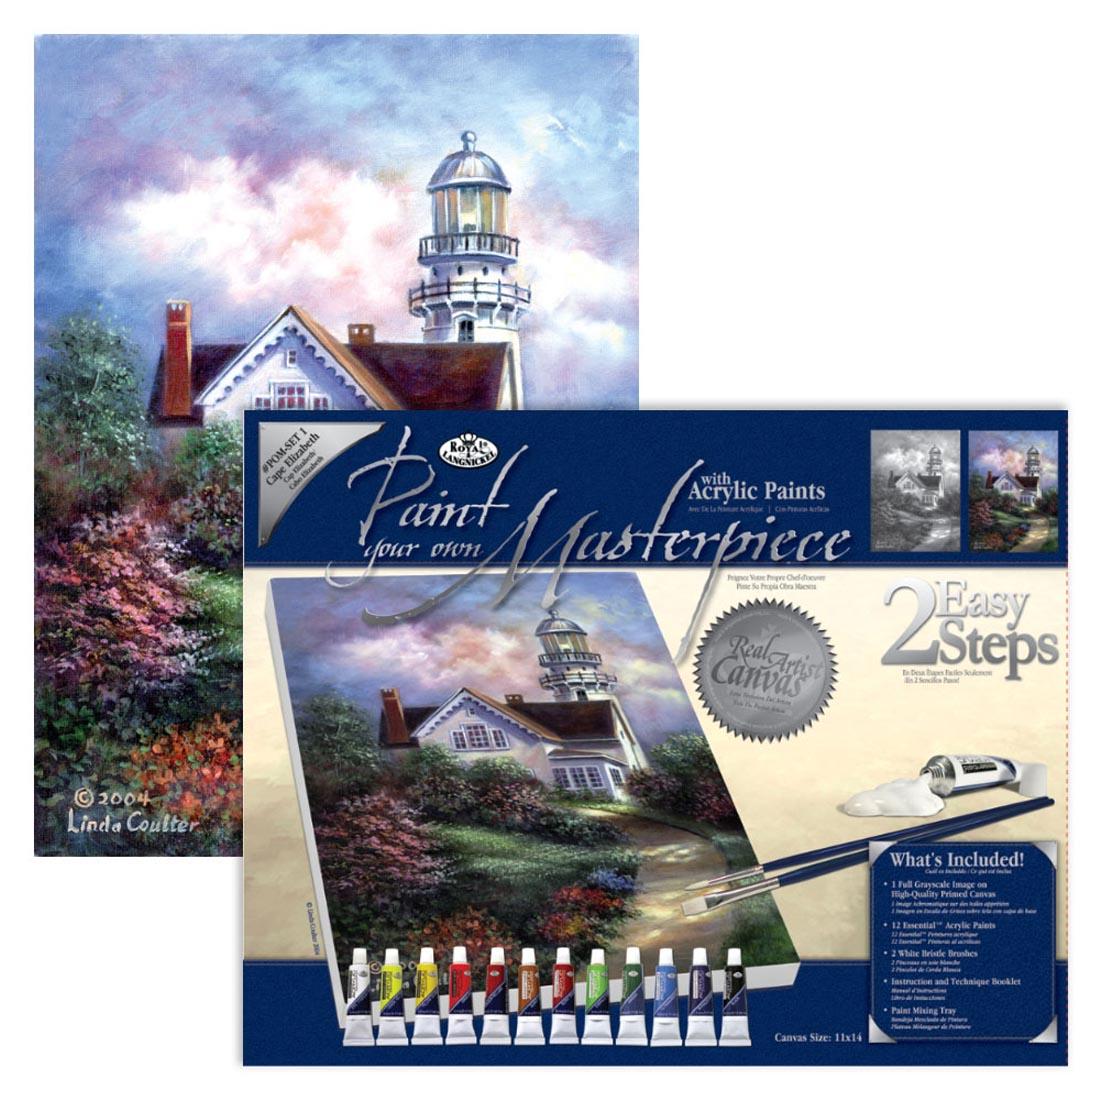 Royal & Langnickel Paint Your Own Masterpiece: Cape Elizabeth shown in the package with a completed example behind it